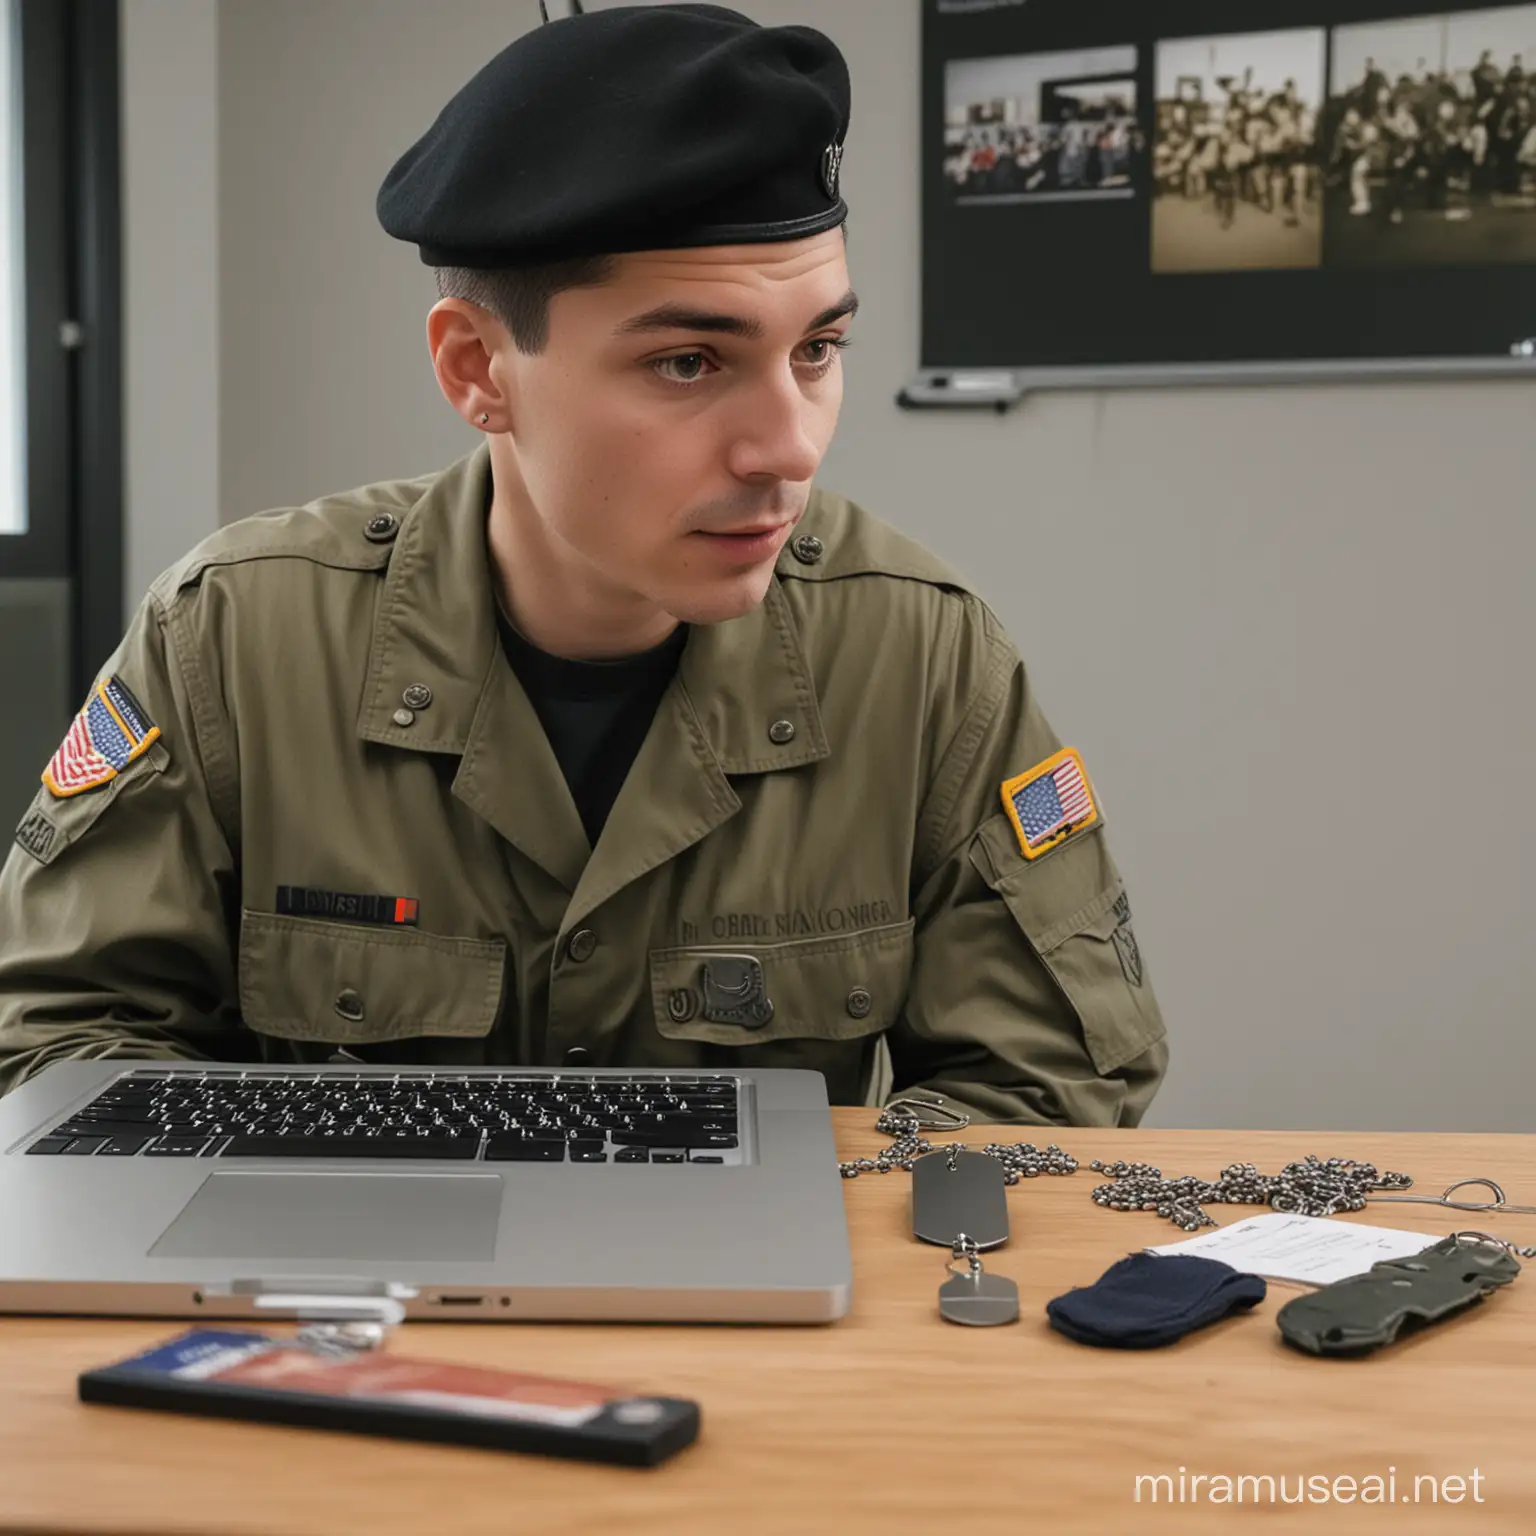 Military to Entrepreneurship Transitioning with Confidence